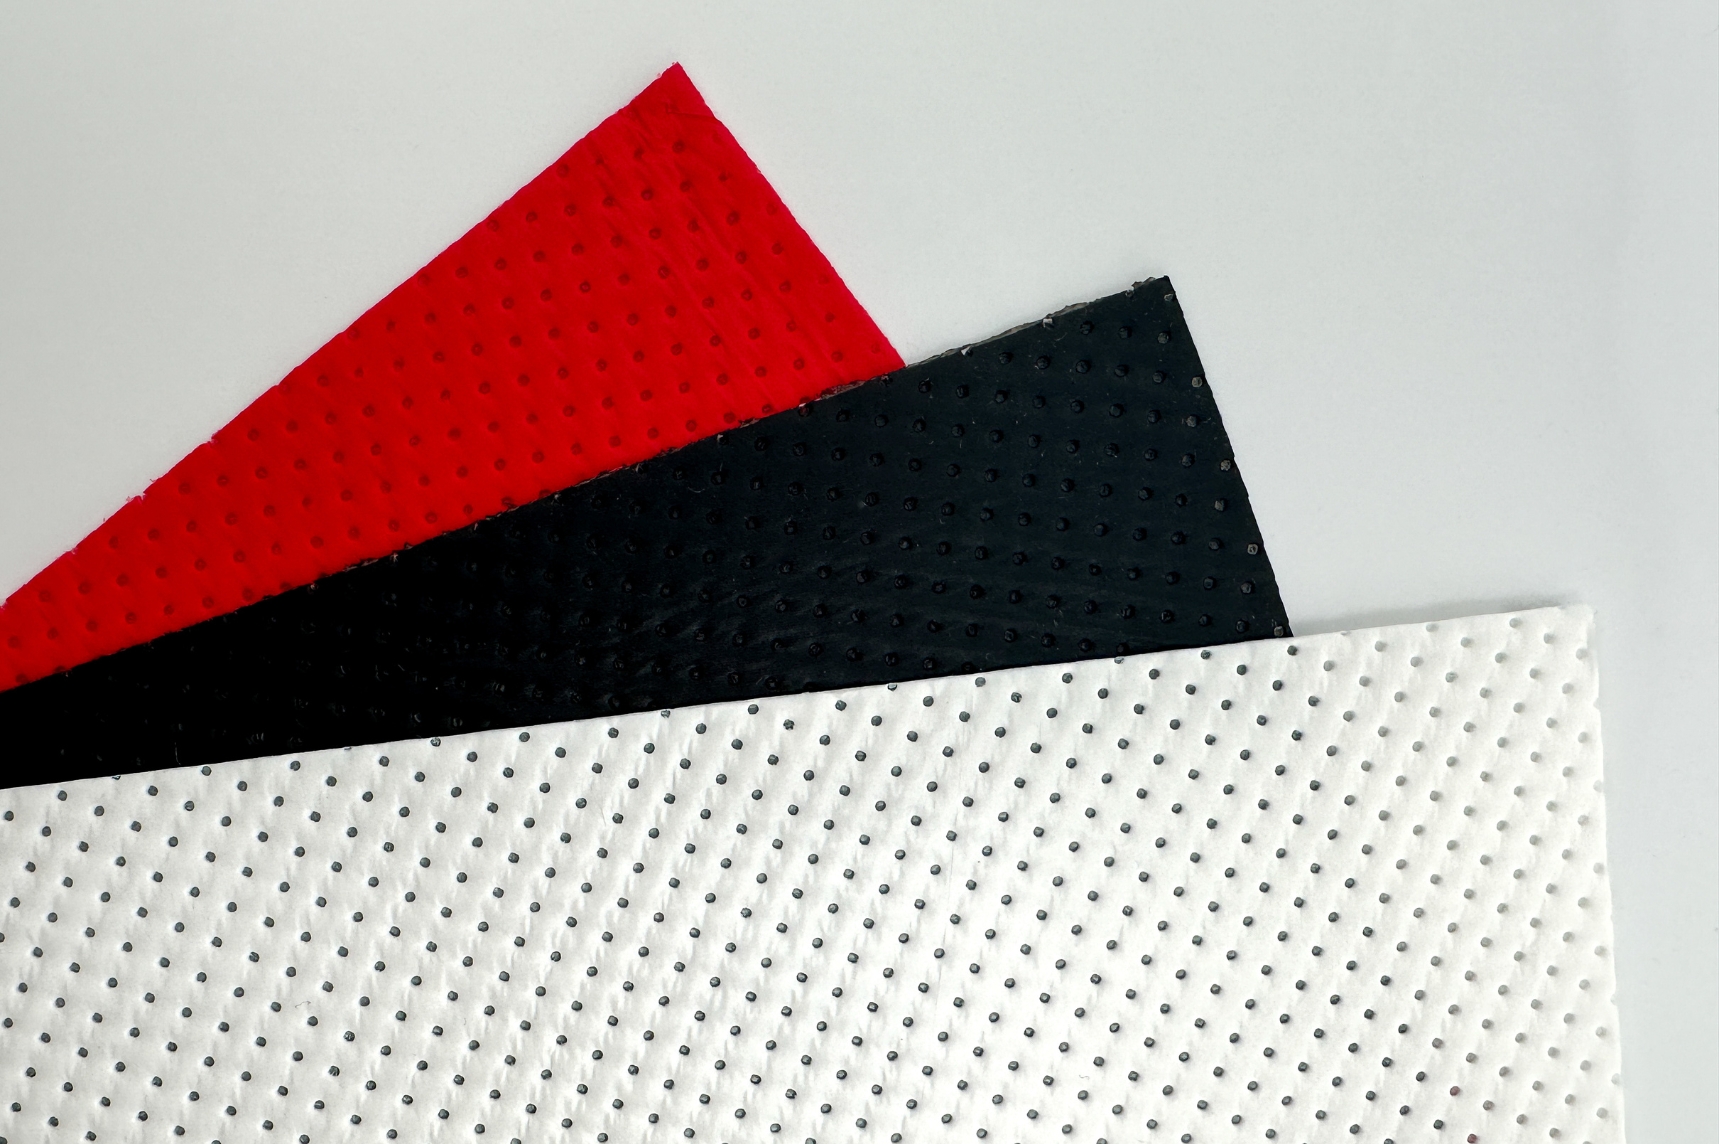 Absorbent pads in red, black and white